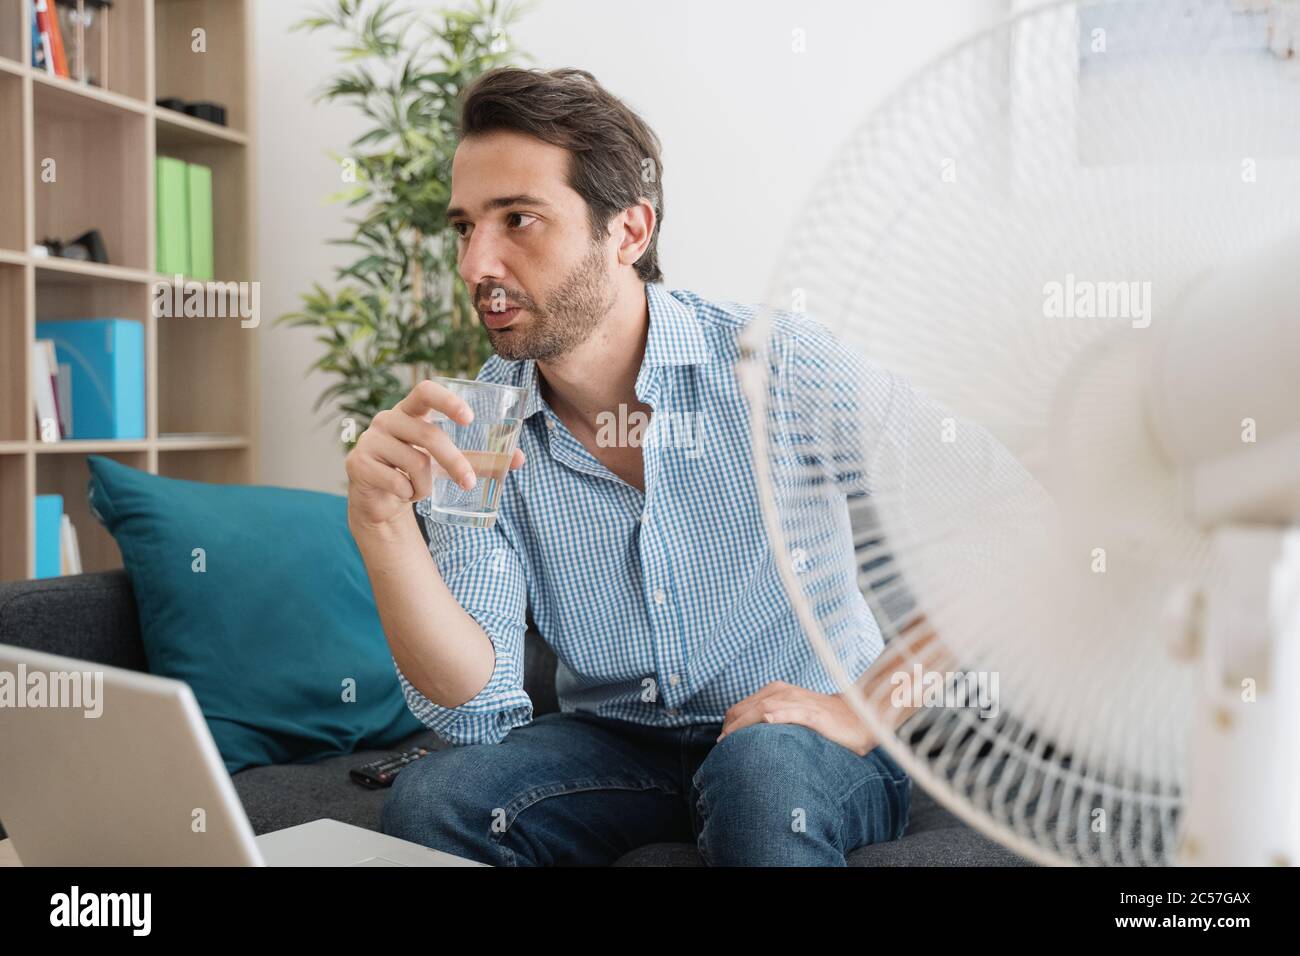 One man portrait trying to refresh during hot summer Stock Photo